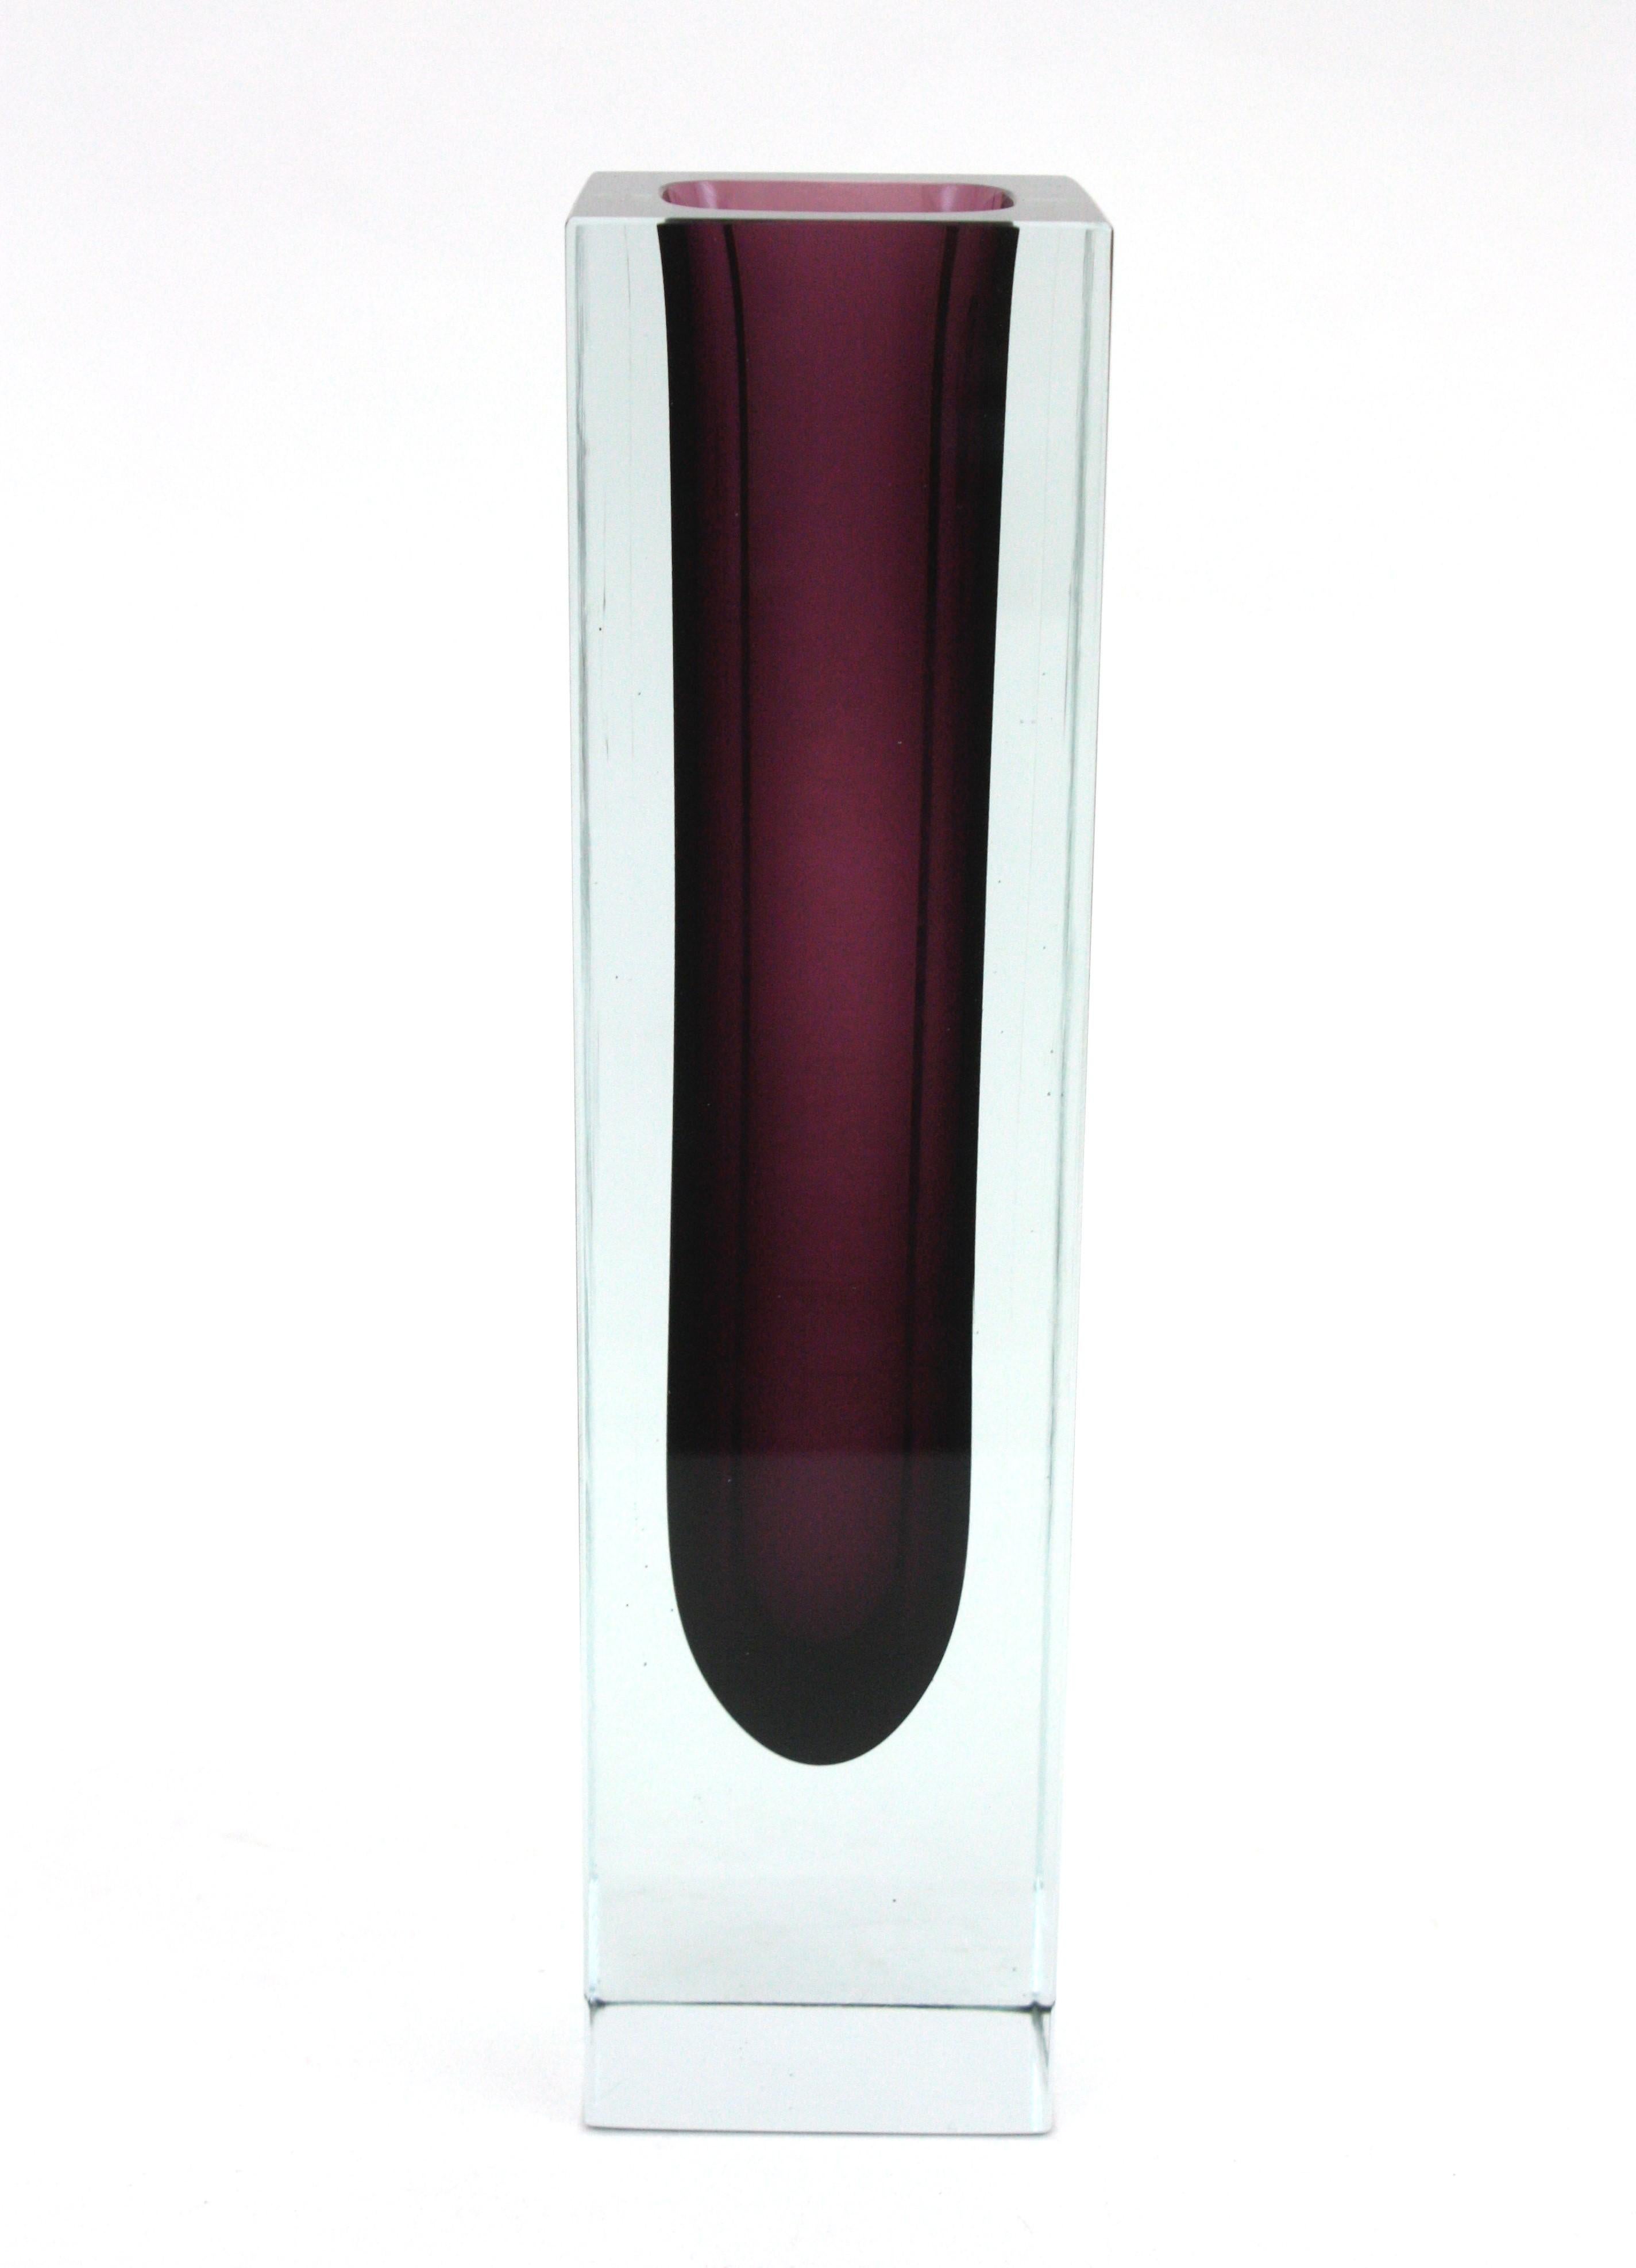 Giant Flavio Poli Murano Sommerso Purple Clear Faceted Art Glass Vase For Sale 6